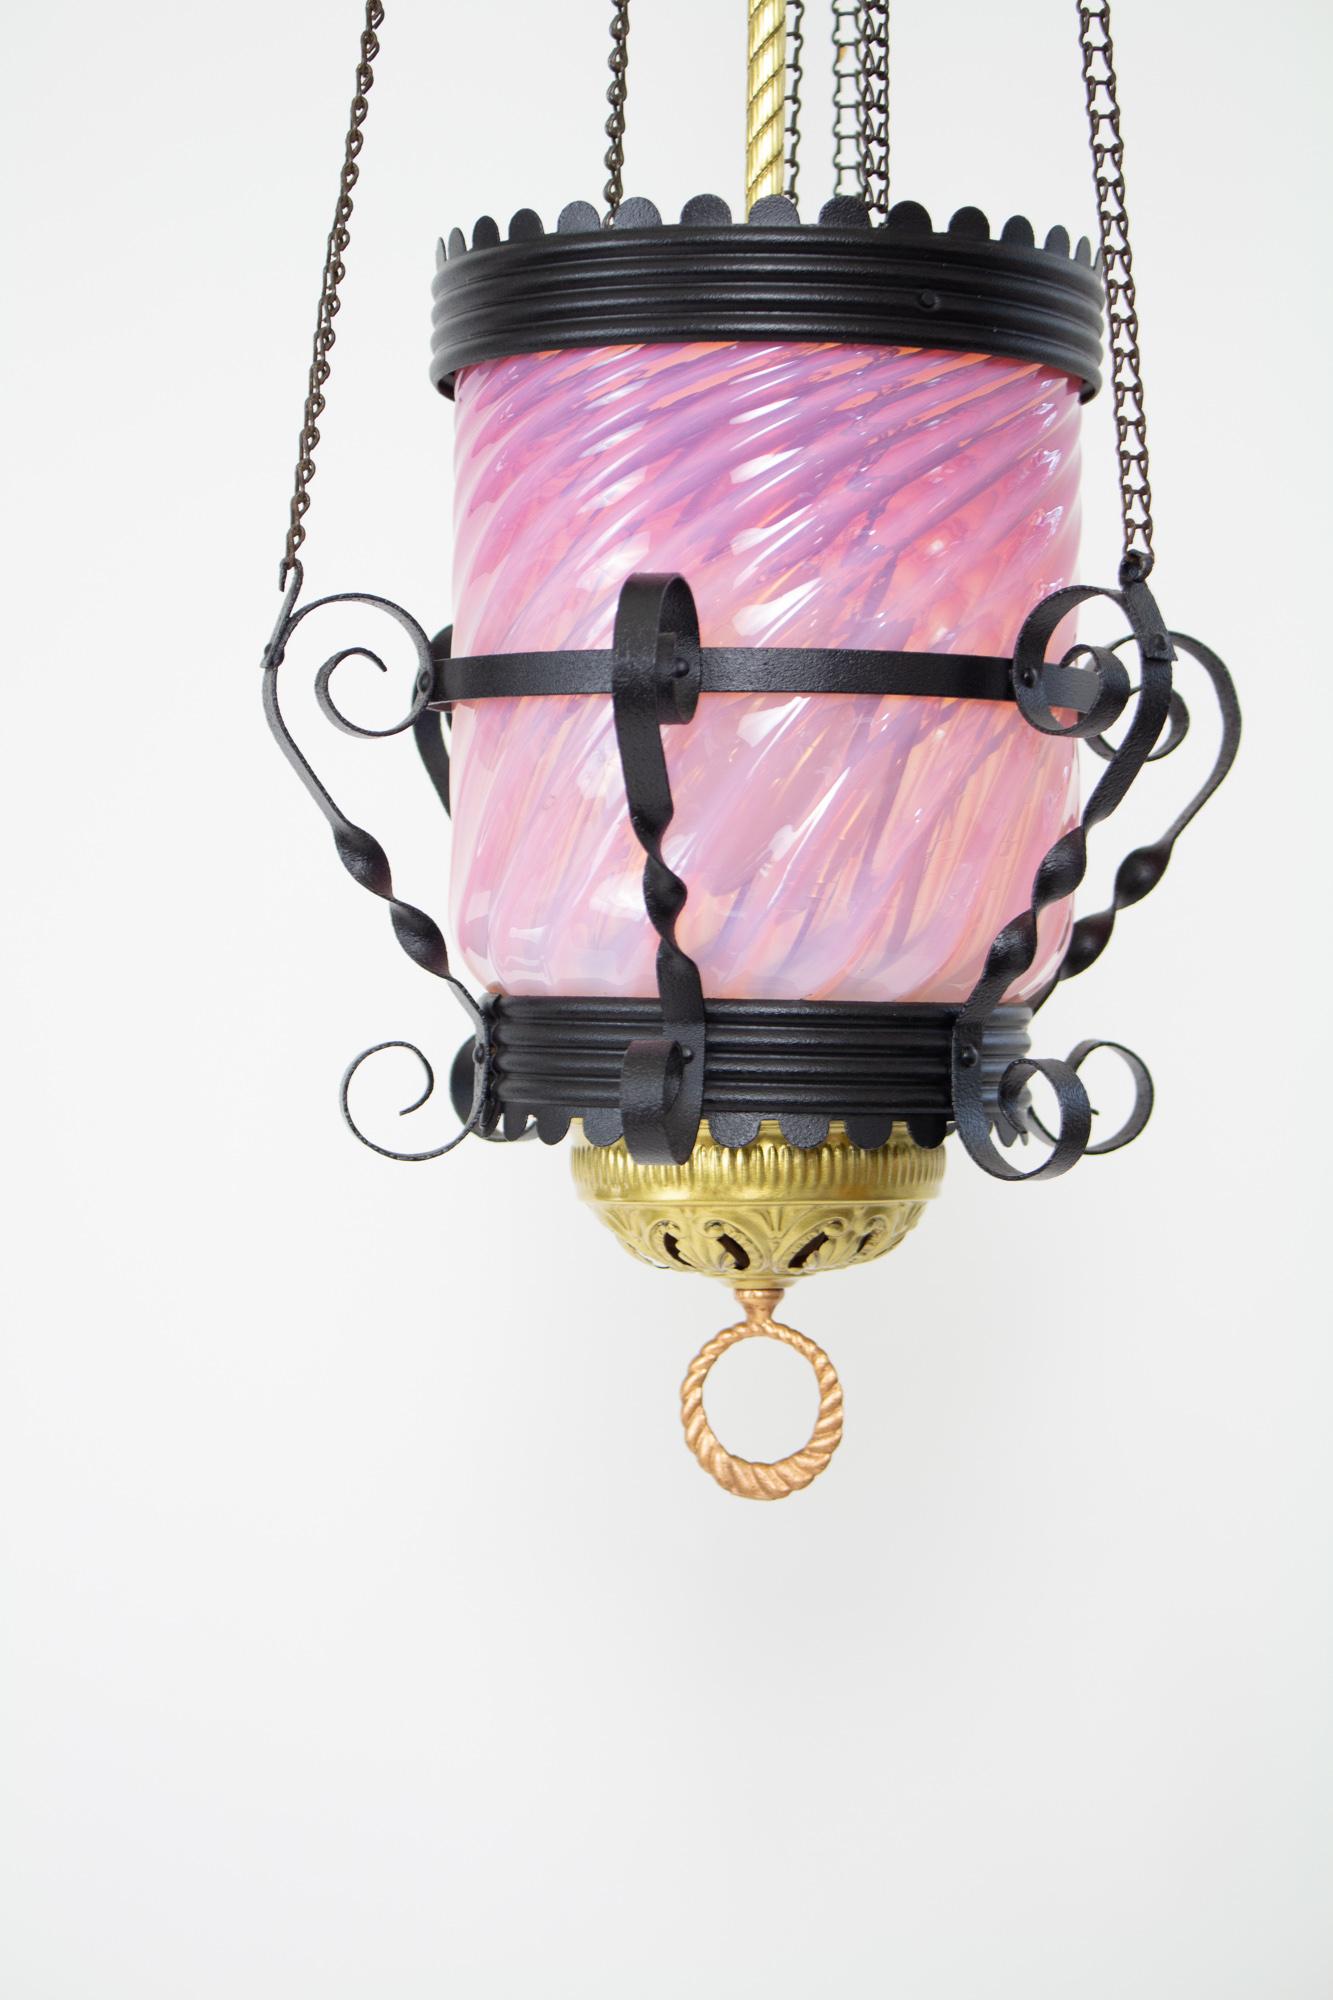 L122 Victorian Pink Swirled Glass Oil Lantern with Iron and Brass For Sale 7